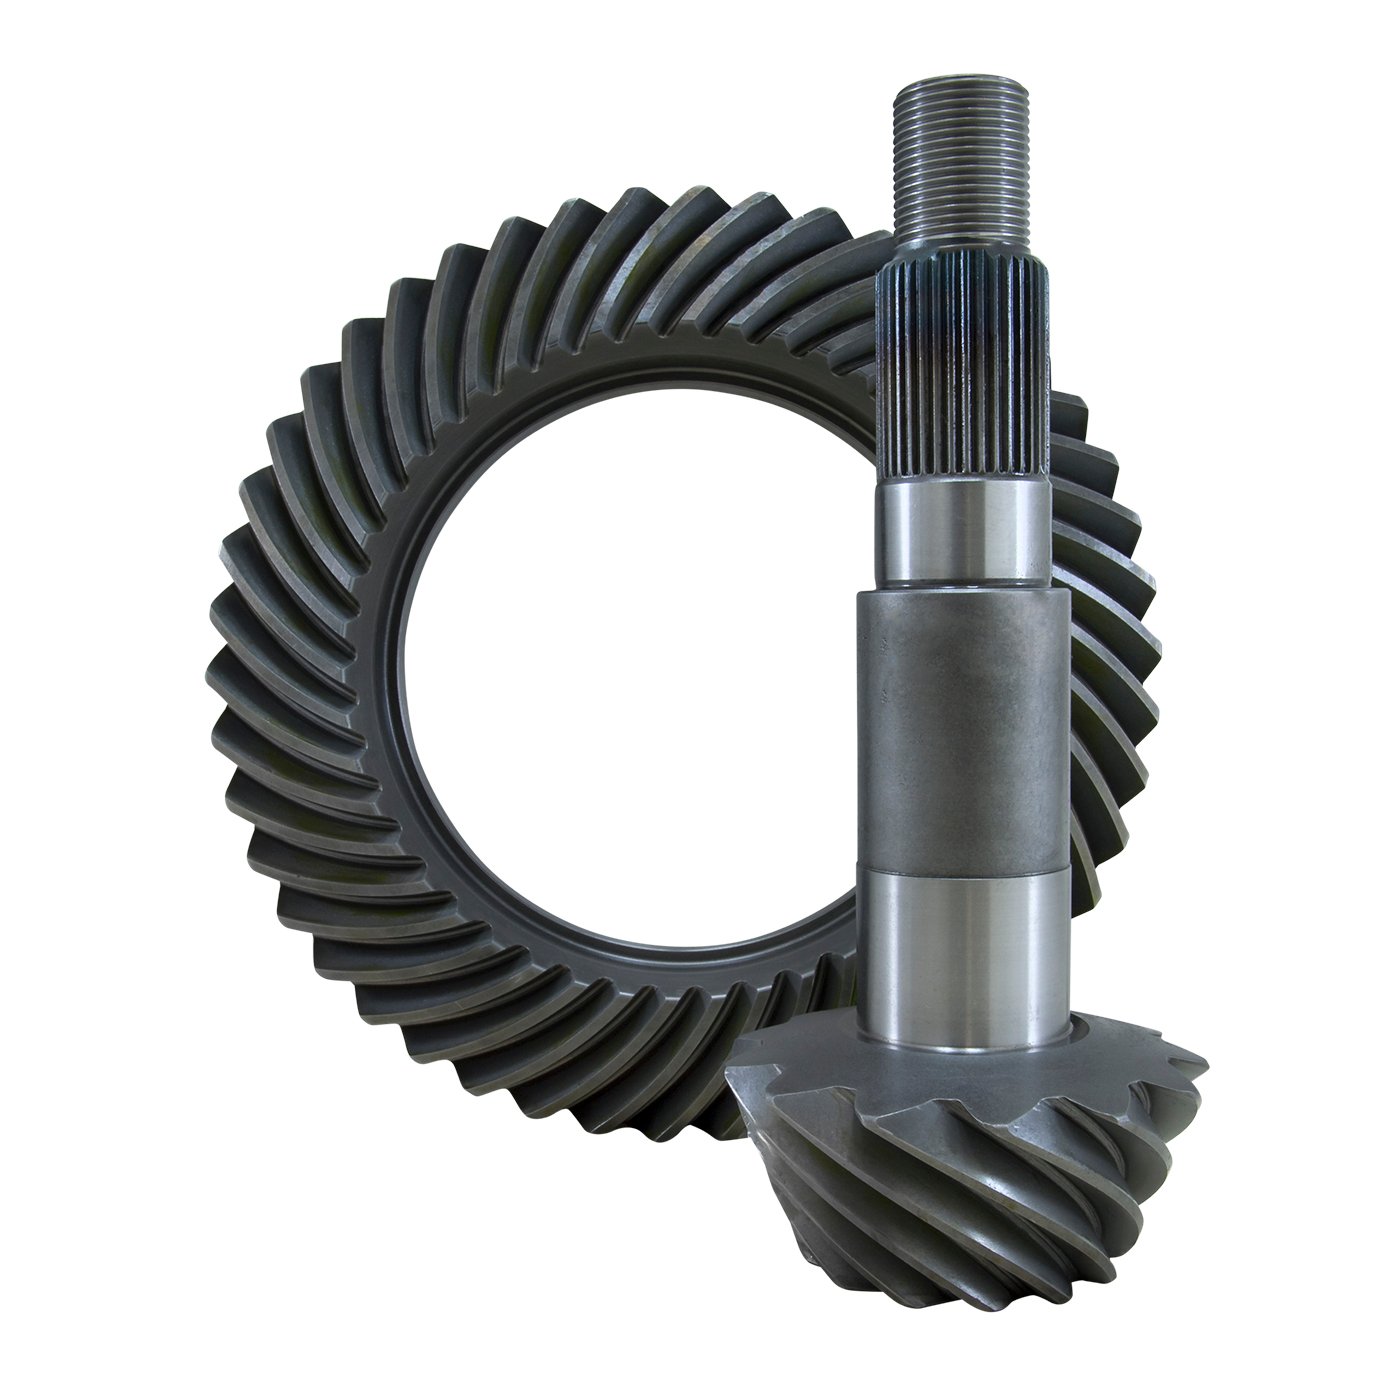 USA Standard ZG D80-430 Replacement Ring & Pinion Gear Set, For Dana 80, 4.30 Ratio